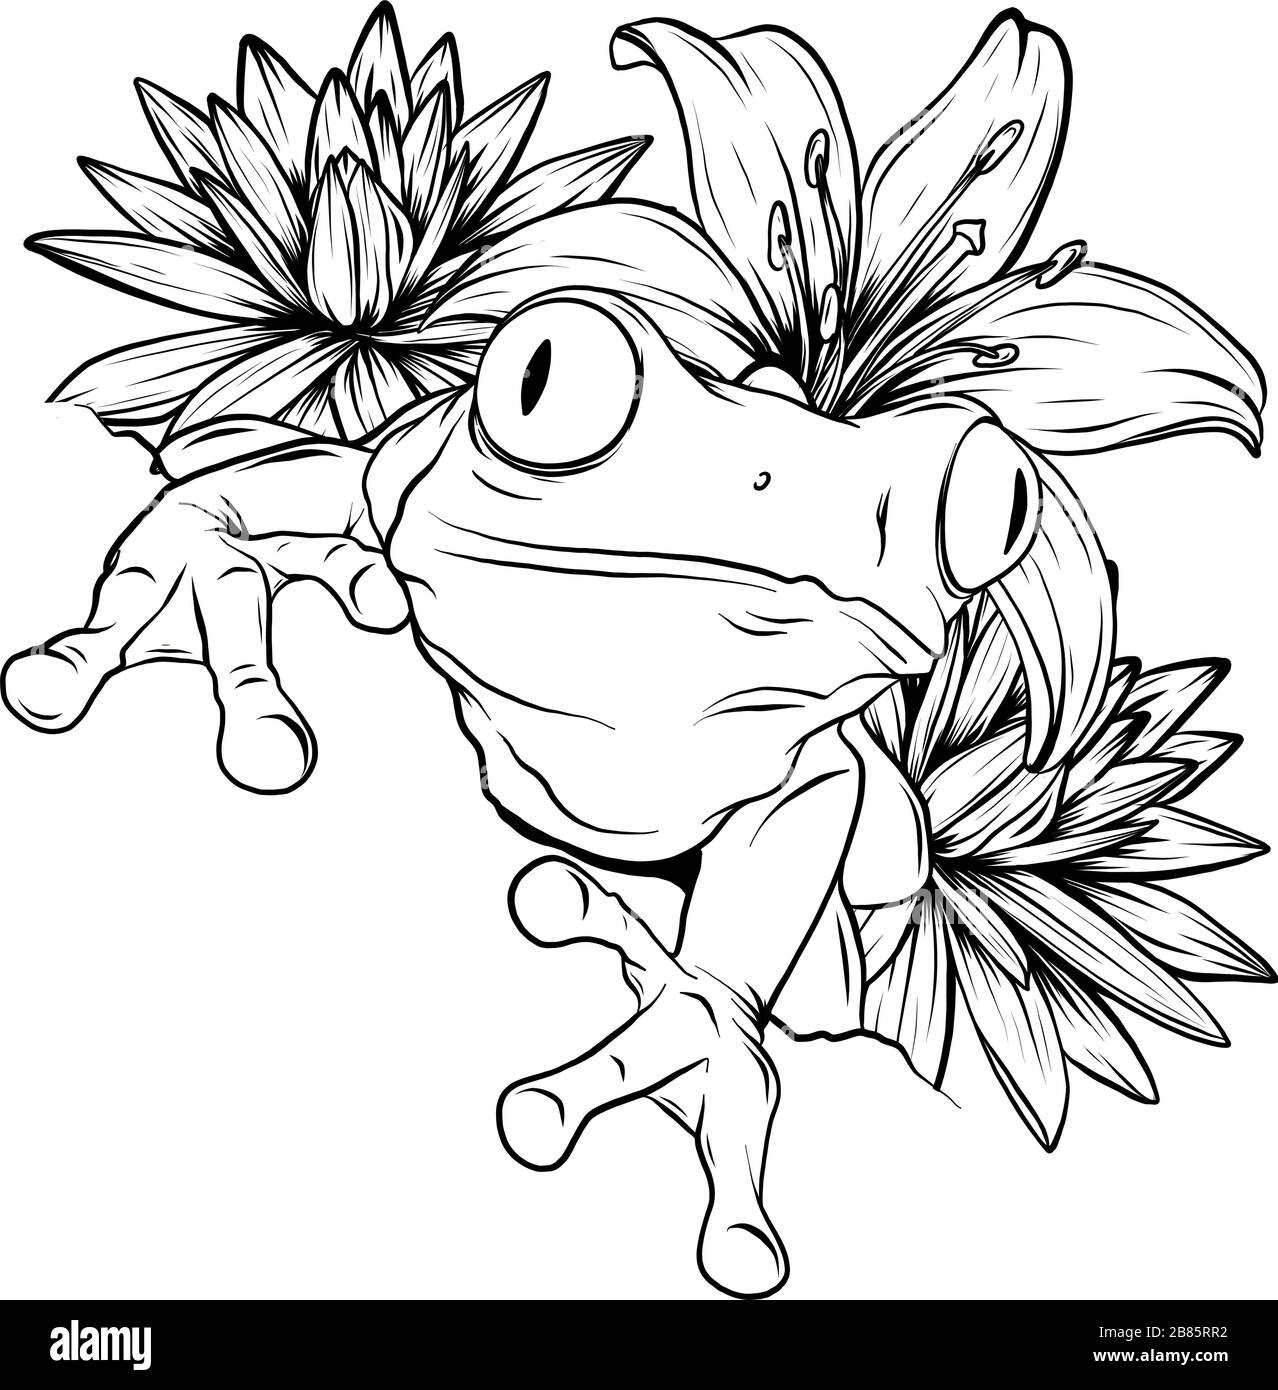 Black and white hand drawn ornate doodle frog in graphic style. Vector illustration with floral decorative ornament Stock Vector